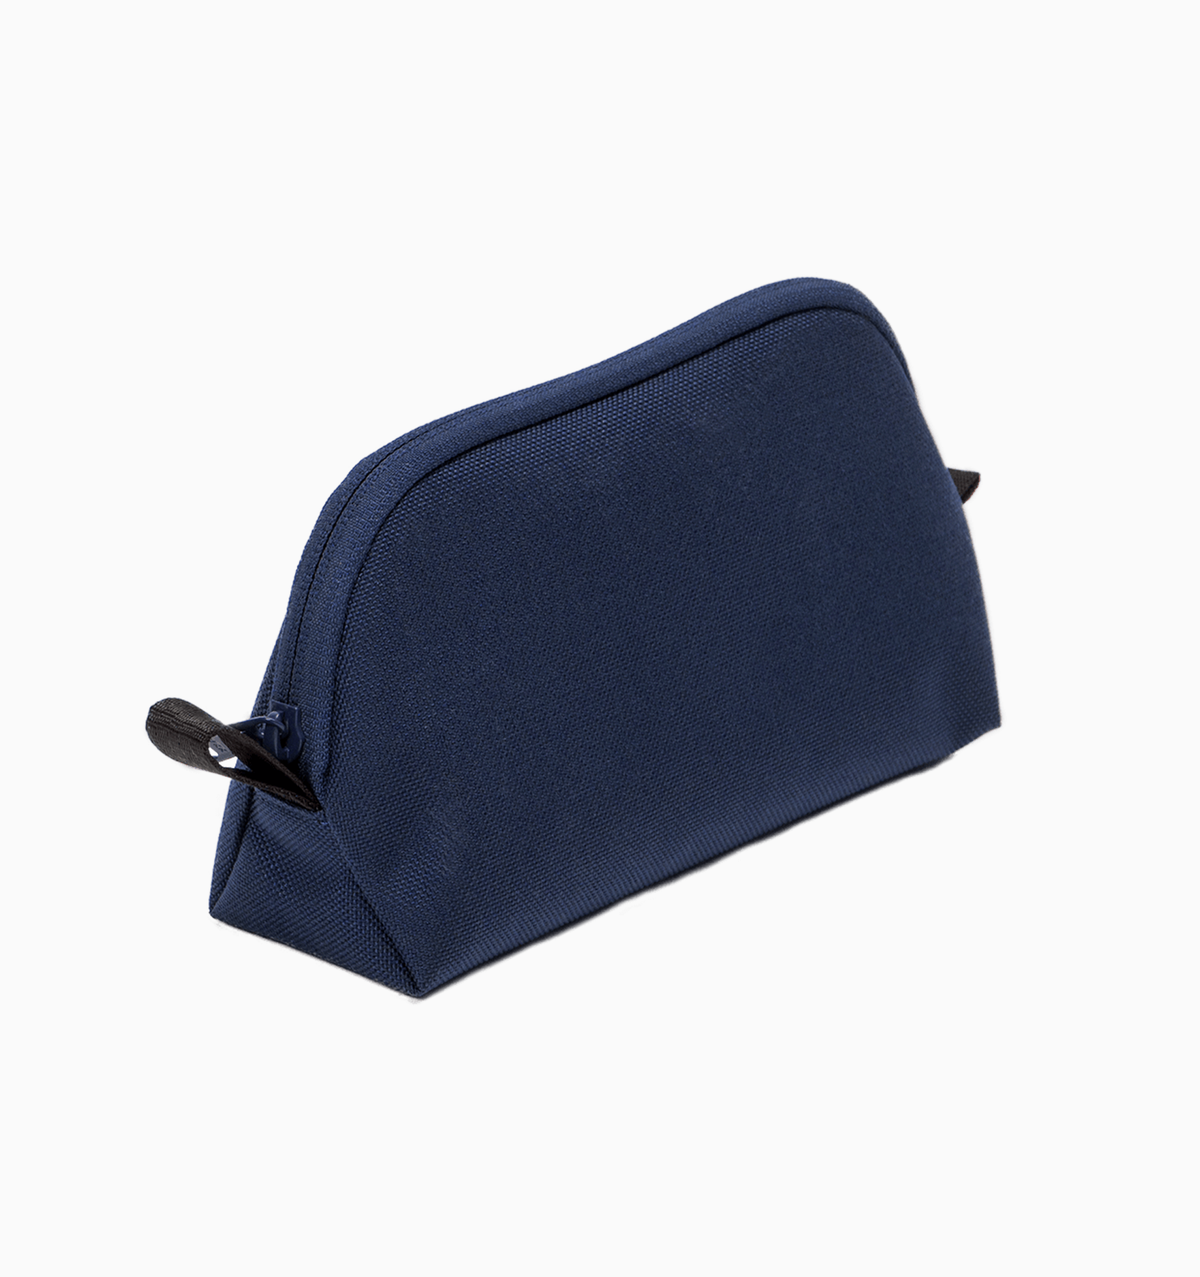 Able Carry Stash Pouch - Cordura Navy